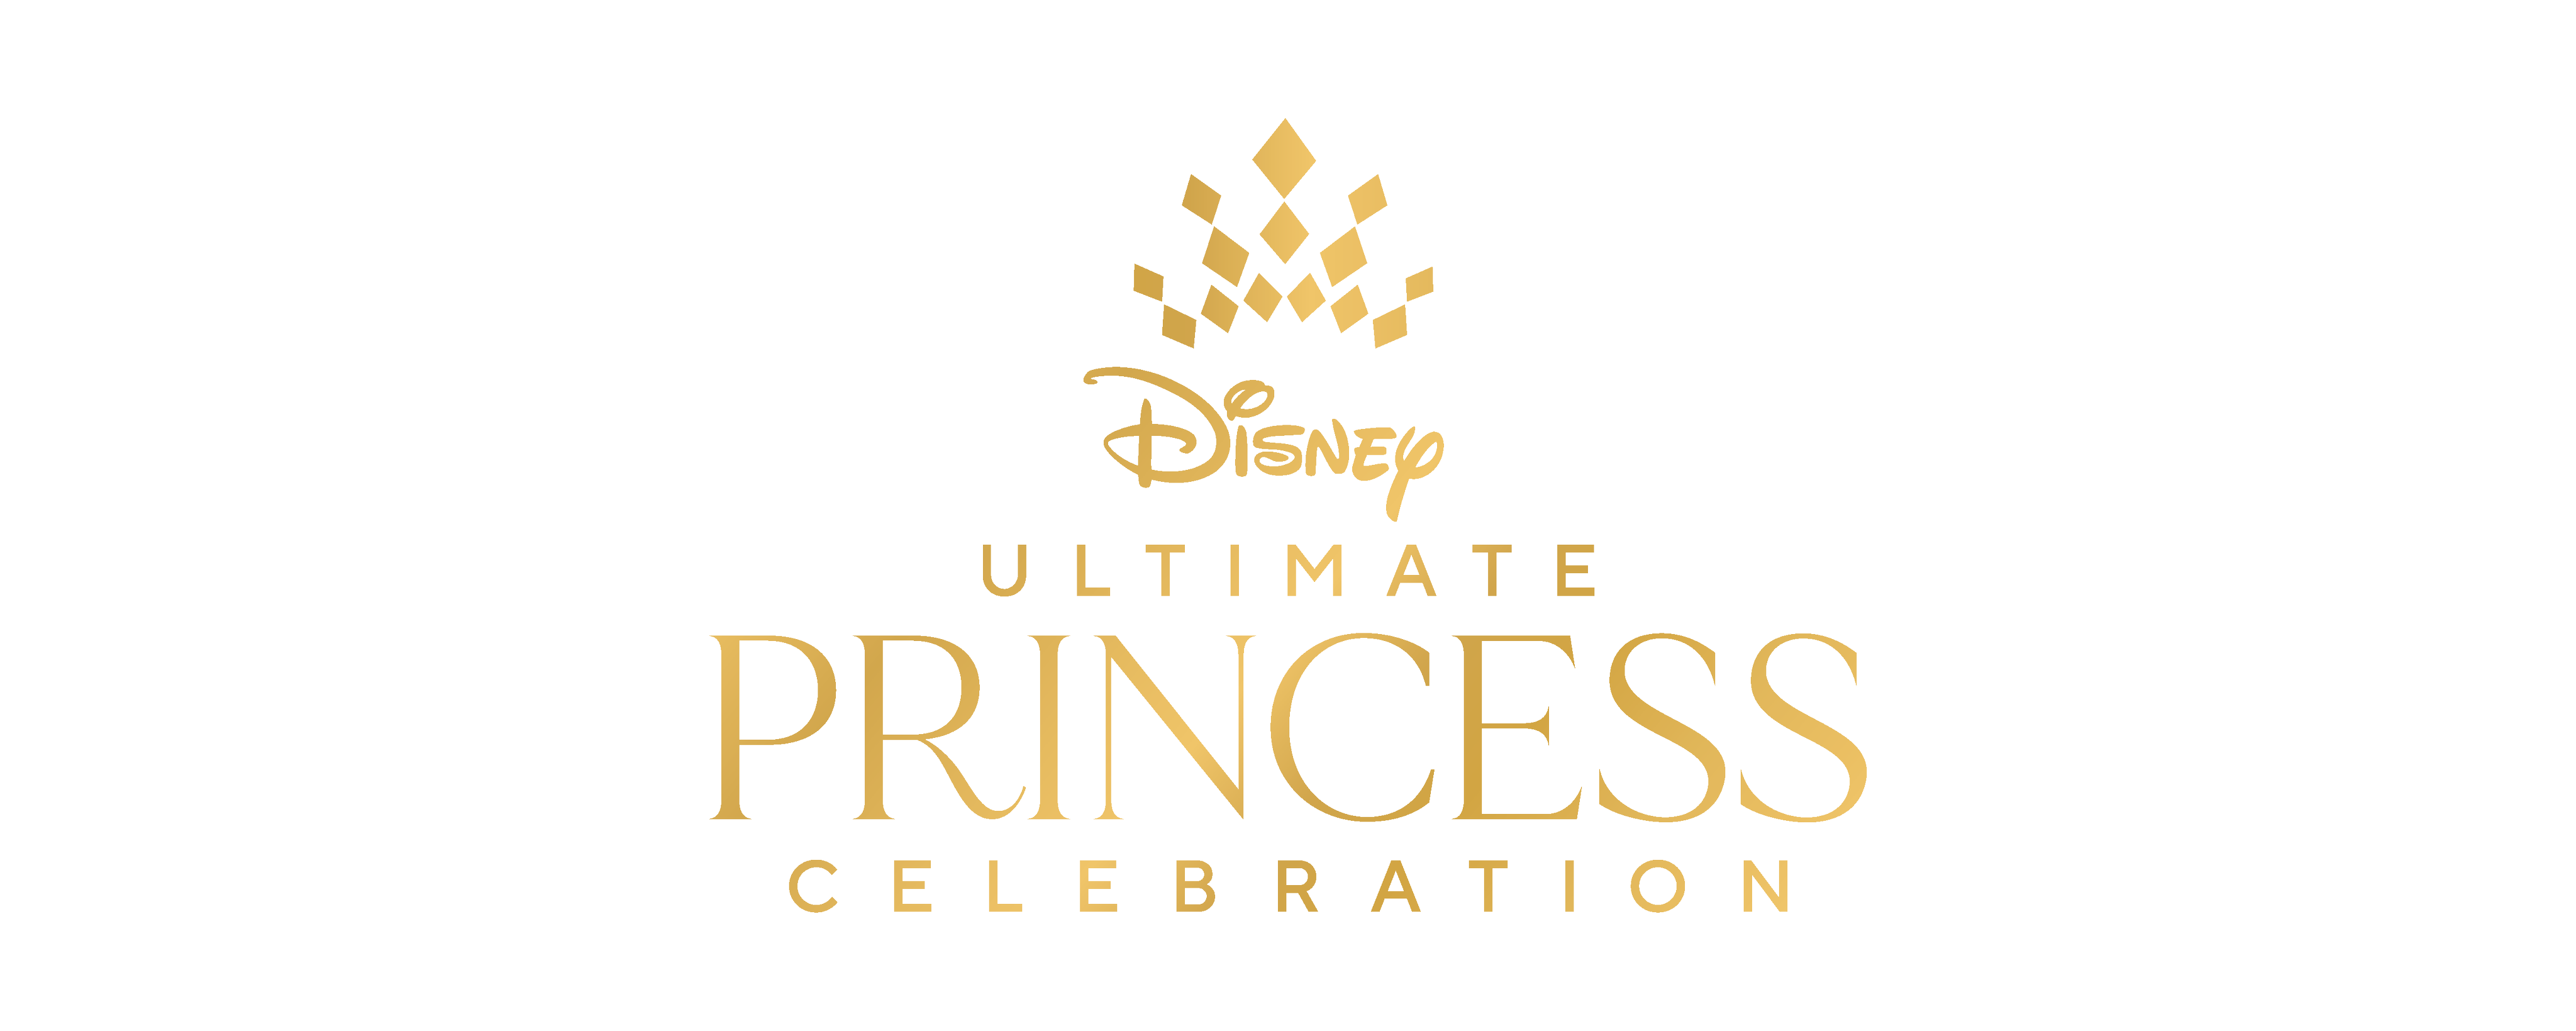 Disney launches multilanguage music video for Ultimate Princess